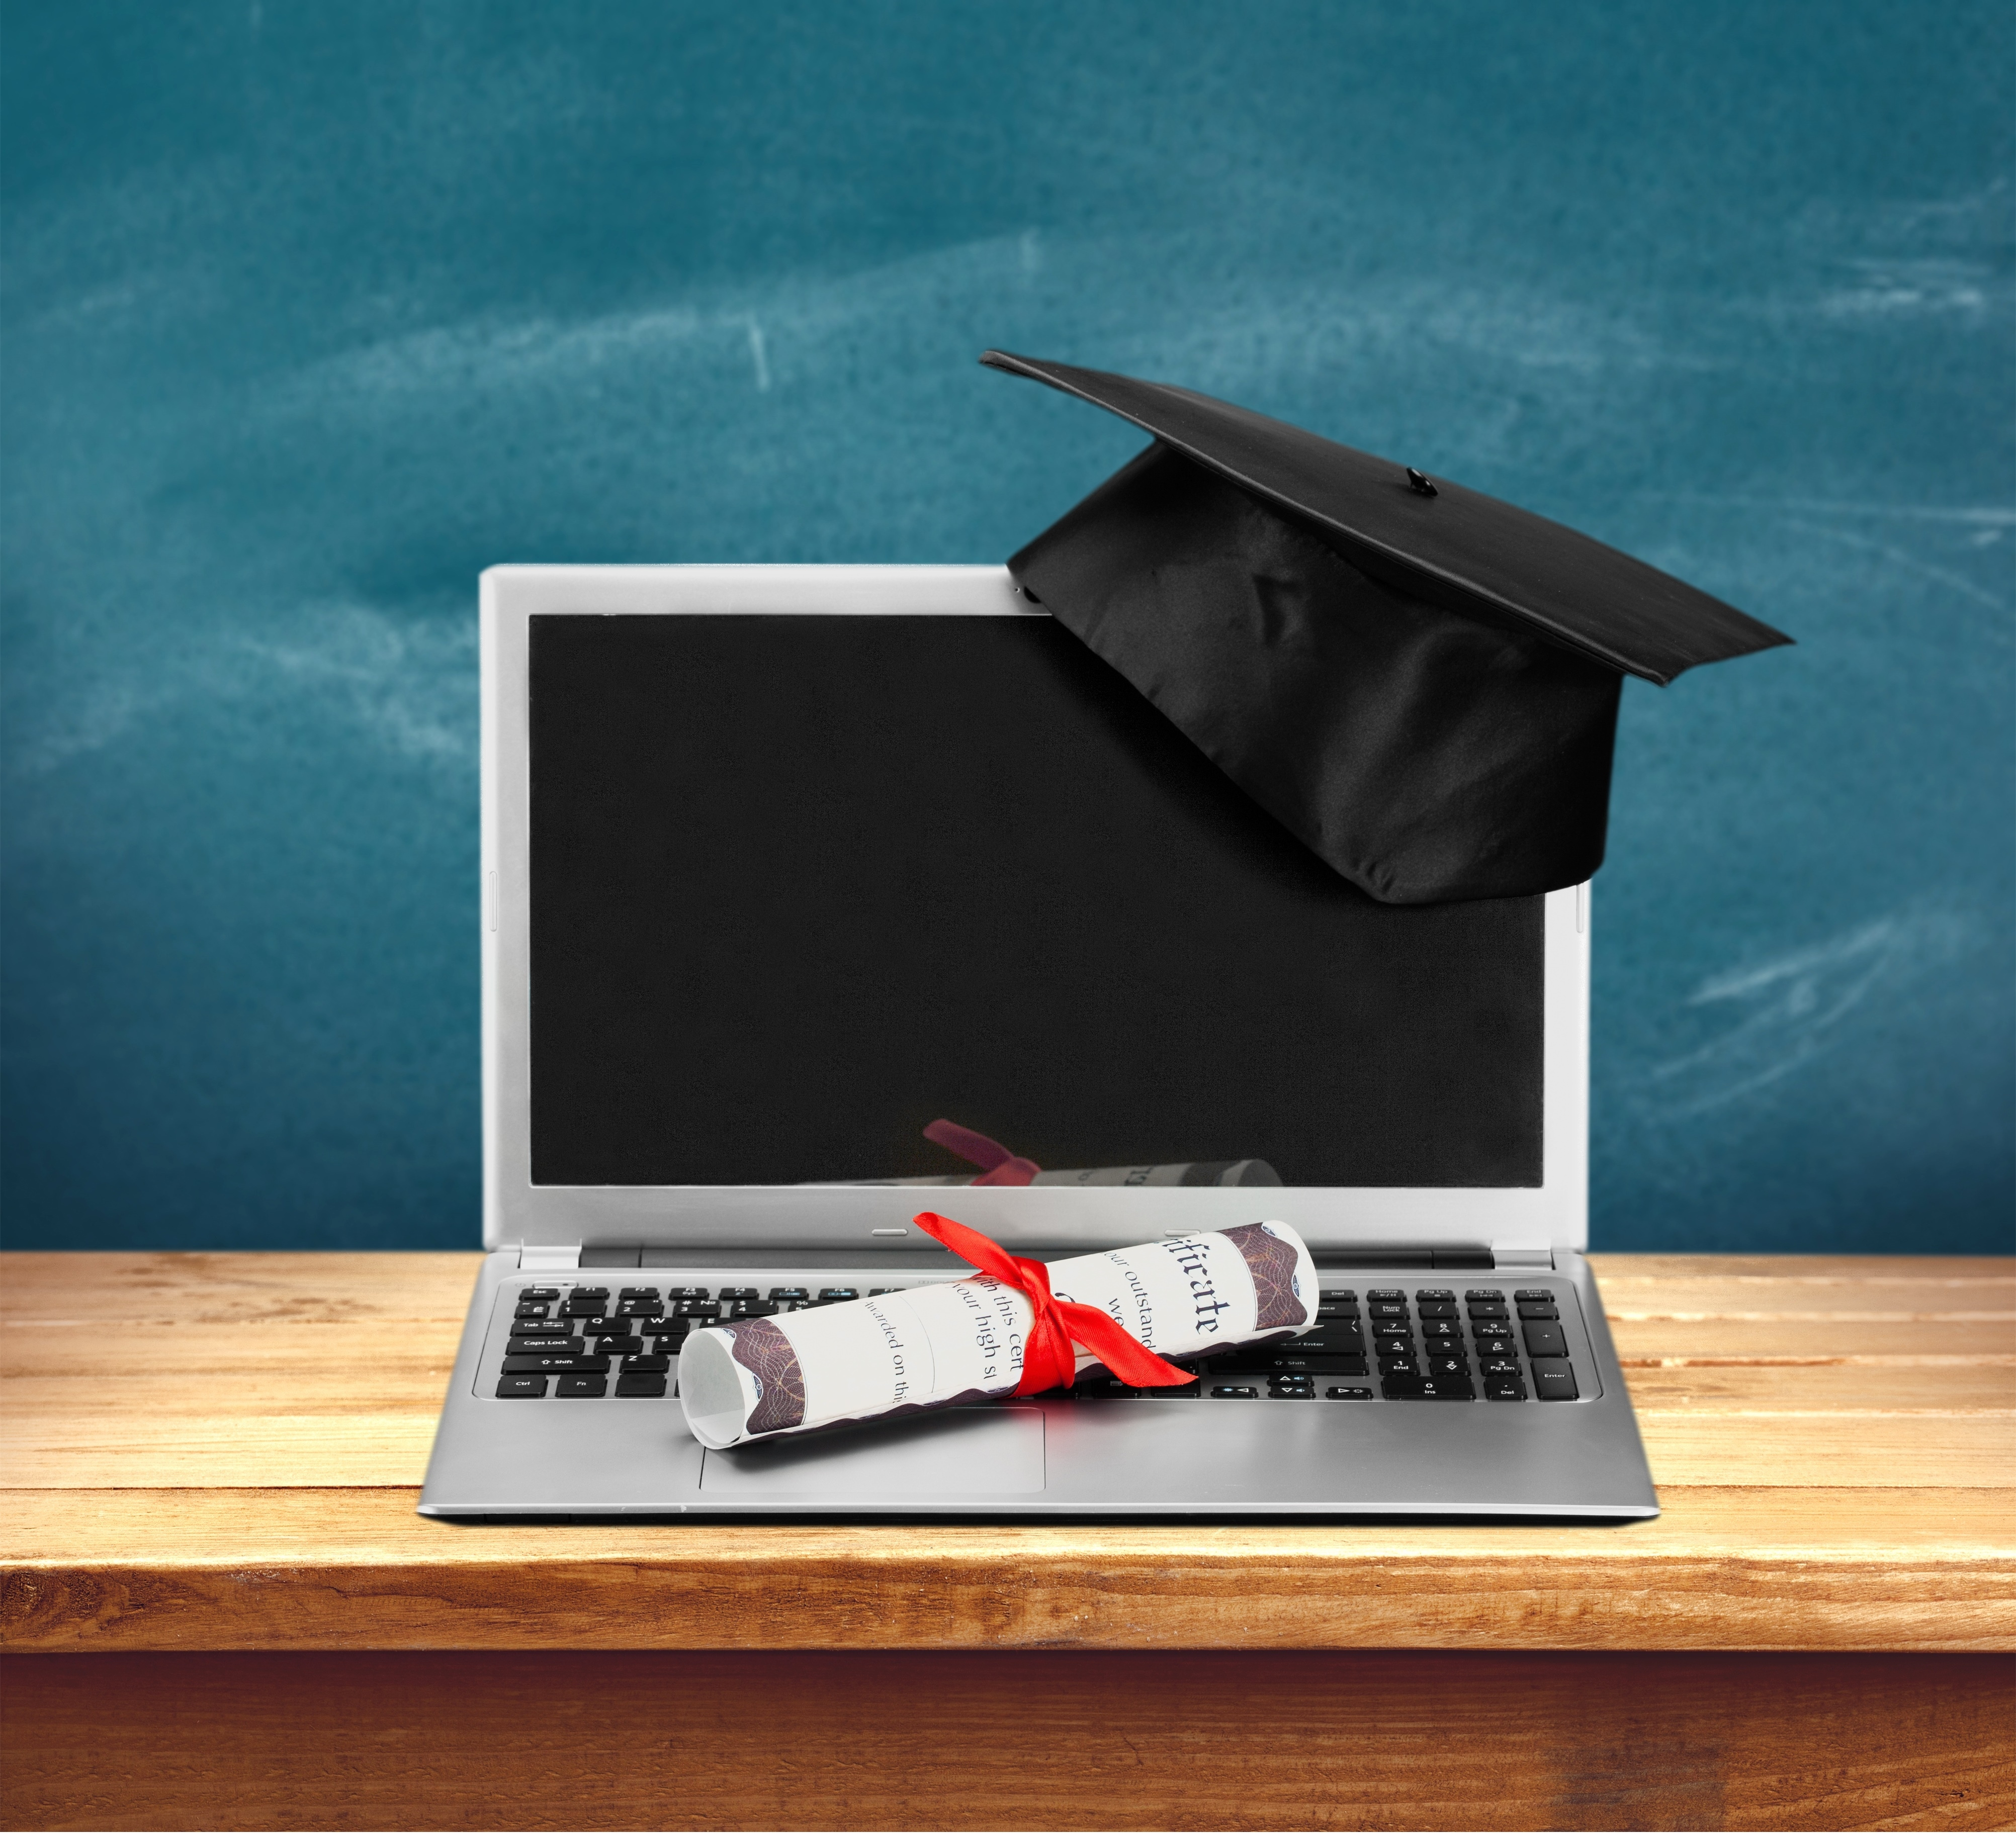 Certificate and graduation cap resting on a computer in front of a chalkboard